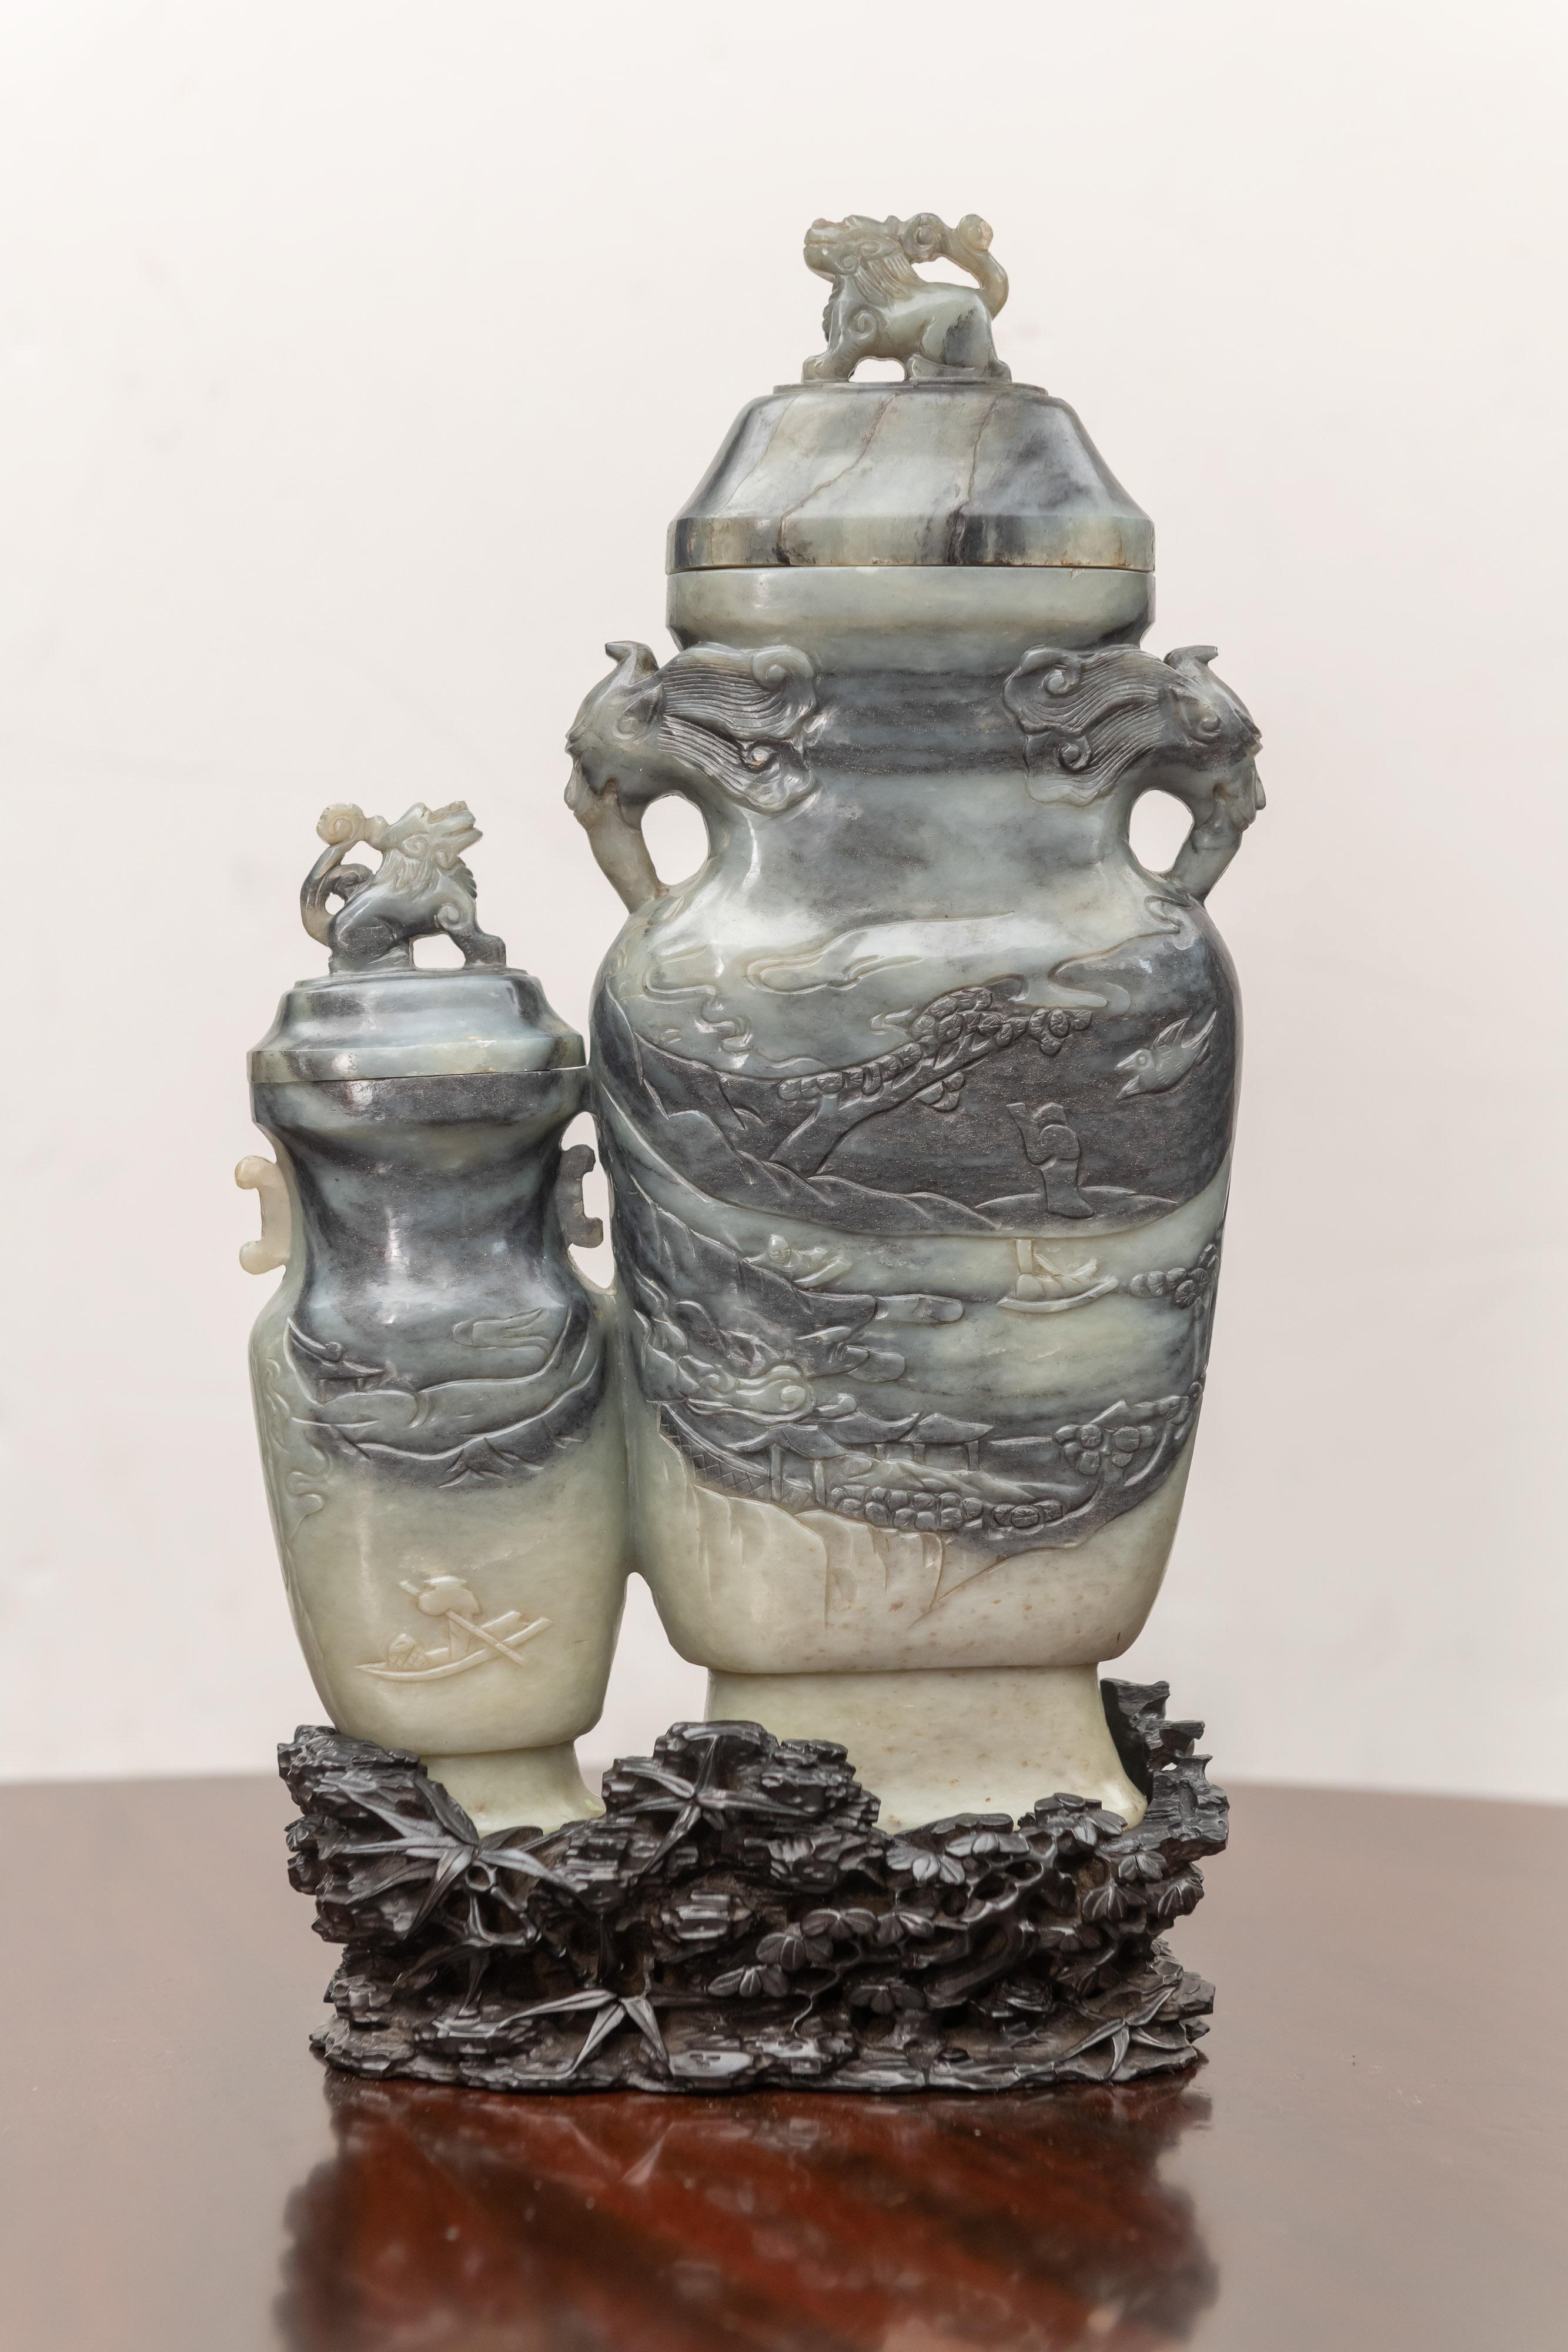 Chinese Nephrite / Jade of a relief carved double vase with old hardwood stand. Dramatic two color contrasting stone example. circa 1900. Classic landscape relief carved body with contrasting colors.
Comprised of two cap lids and an old hardwood